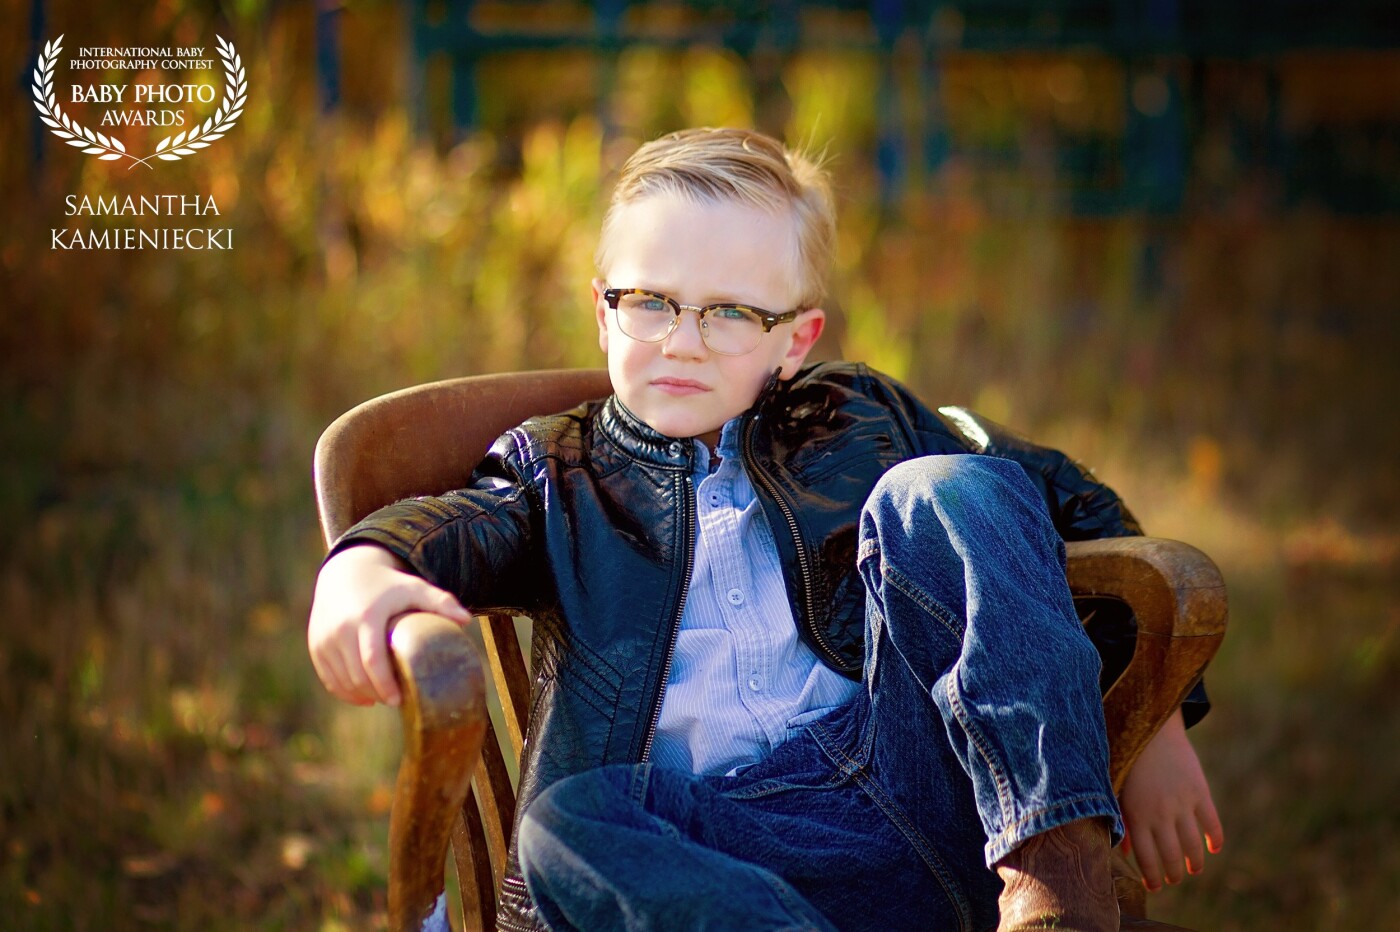 This was near the end of my shoot with this little guy and his brother. He was done with pictures and this was his I’m not smiling anymore pose. Just loved it, so chill. 